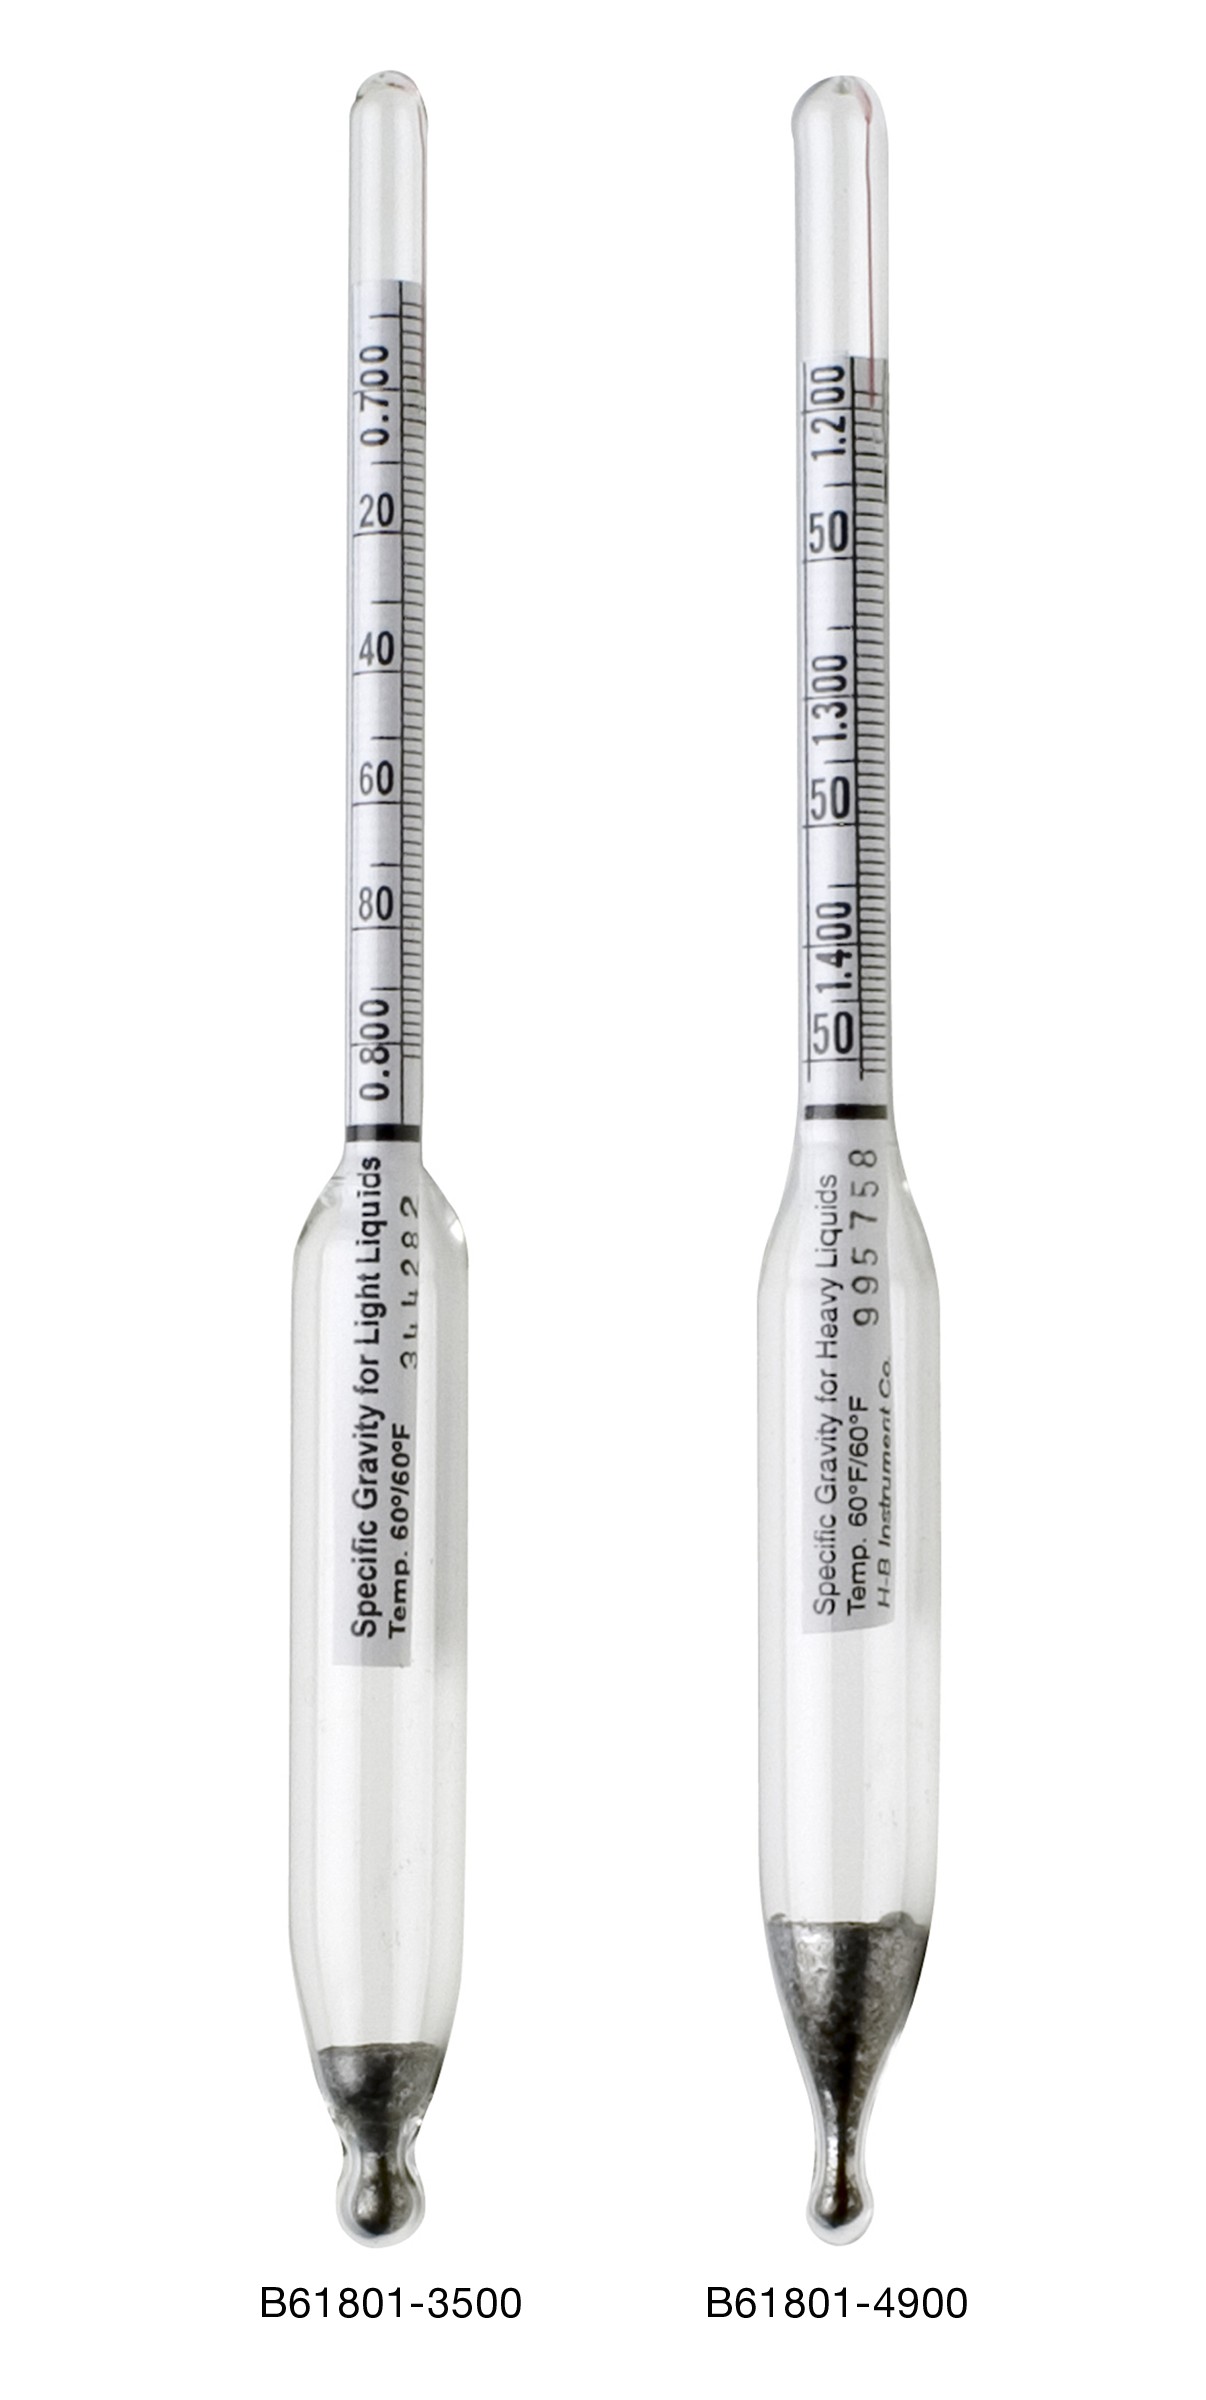 B61821-0700 H-B DURAC Safety 1.600/1.820 Specific Gravity Combined Form Thermo-Hydrometer Bel-Art 